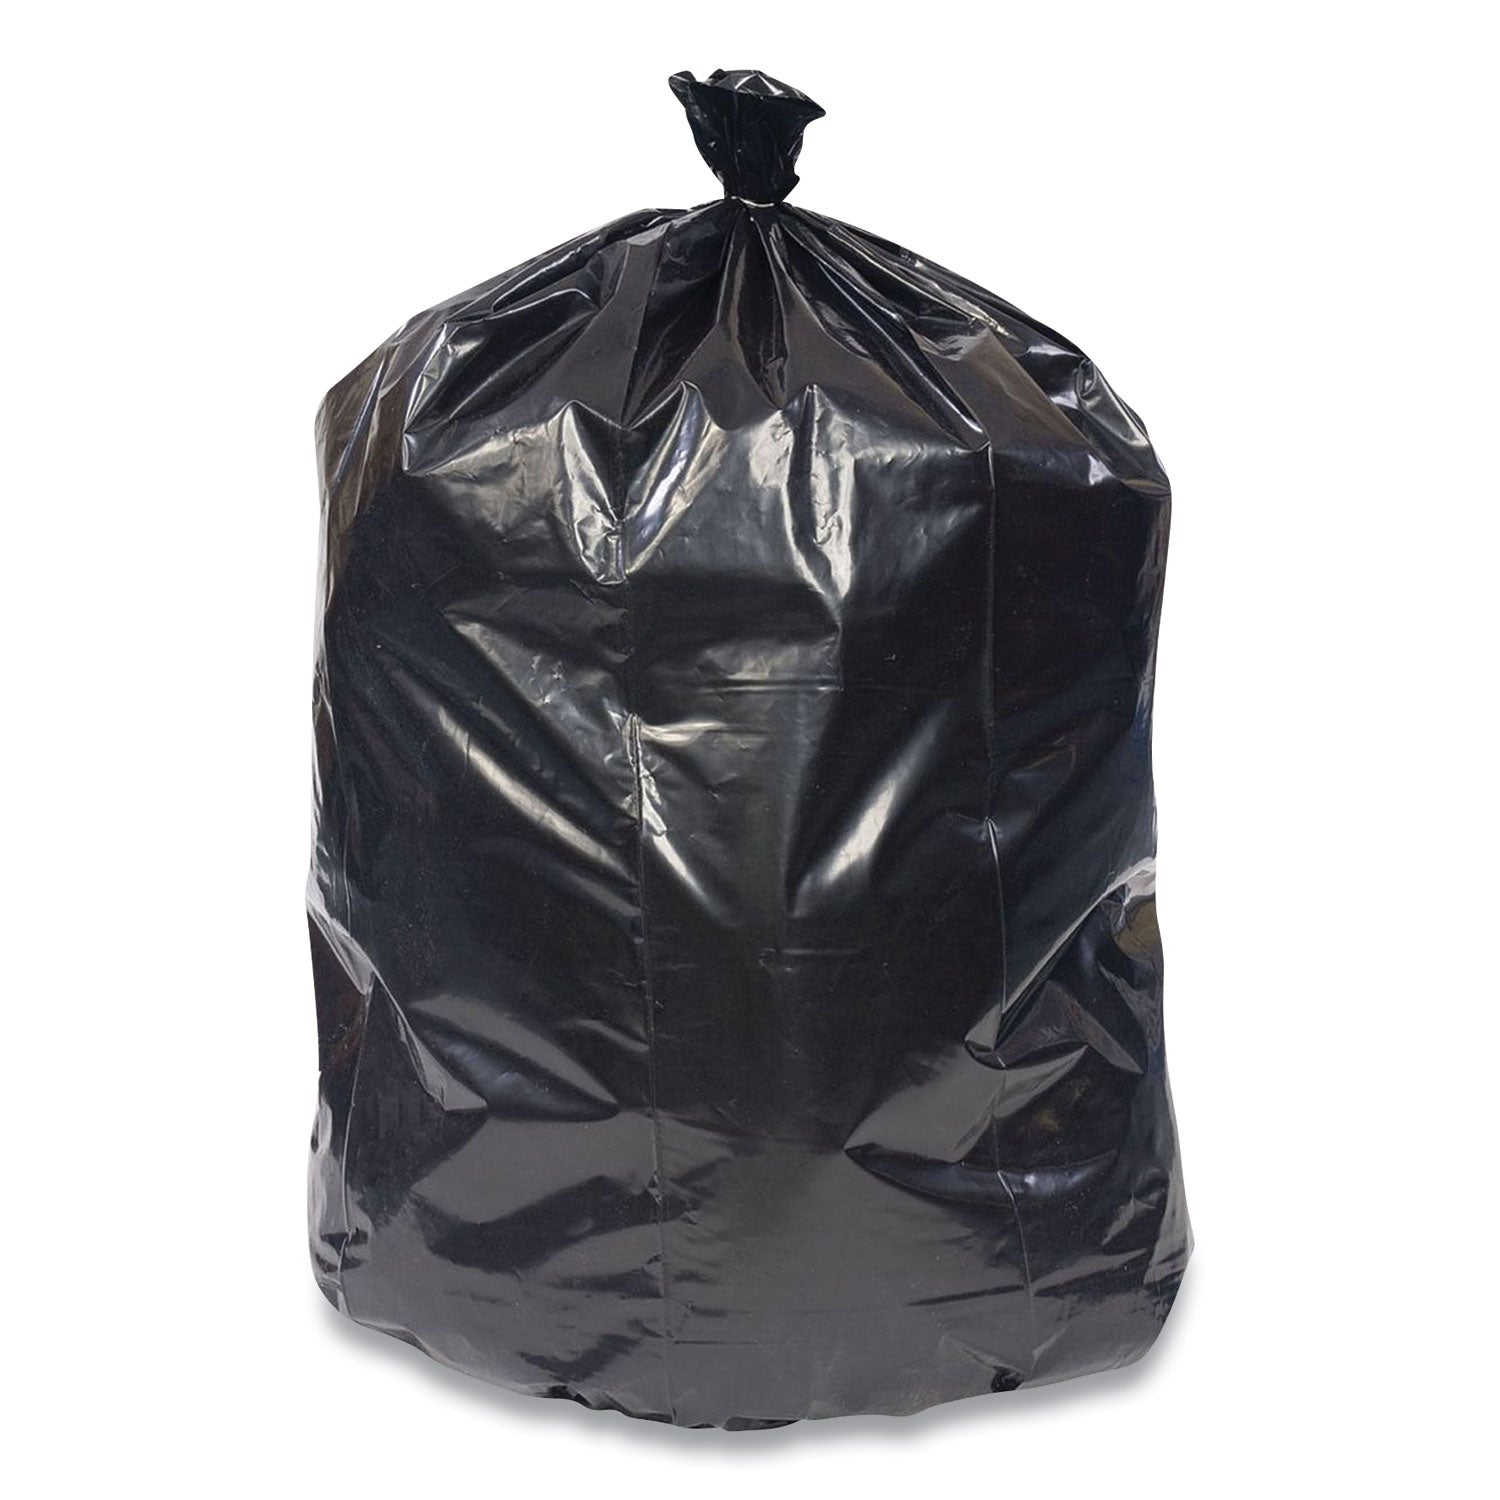 high-density-can-liners-56-gal-16-to-20-mic-43-x-48-black-25-bags-roll-8-rolls-carton_cwz168571 - 1